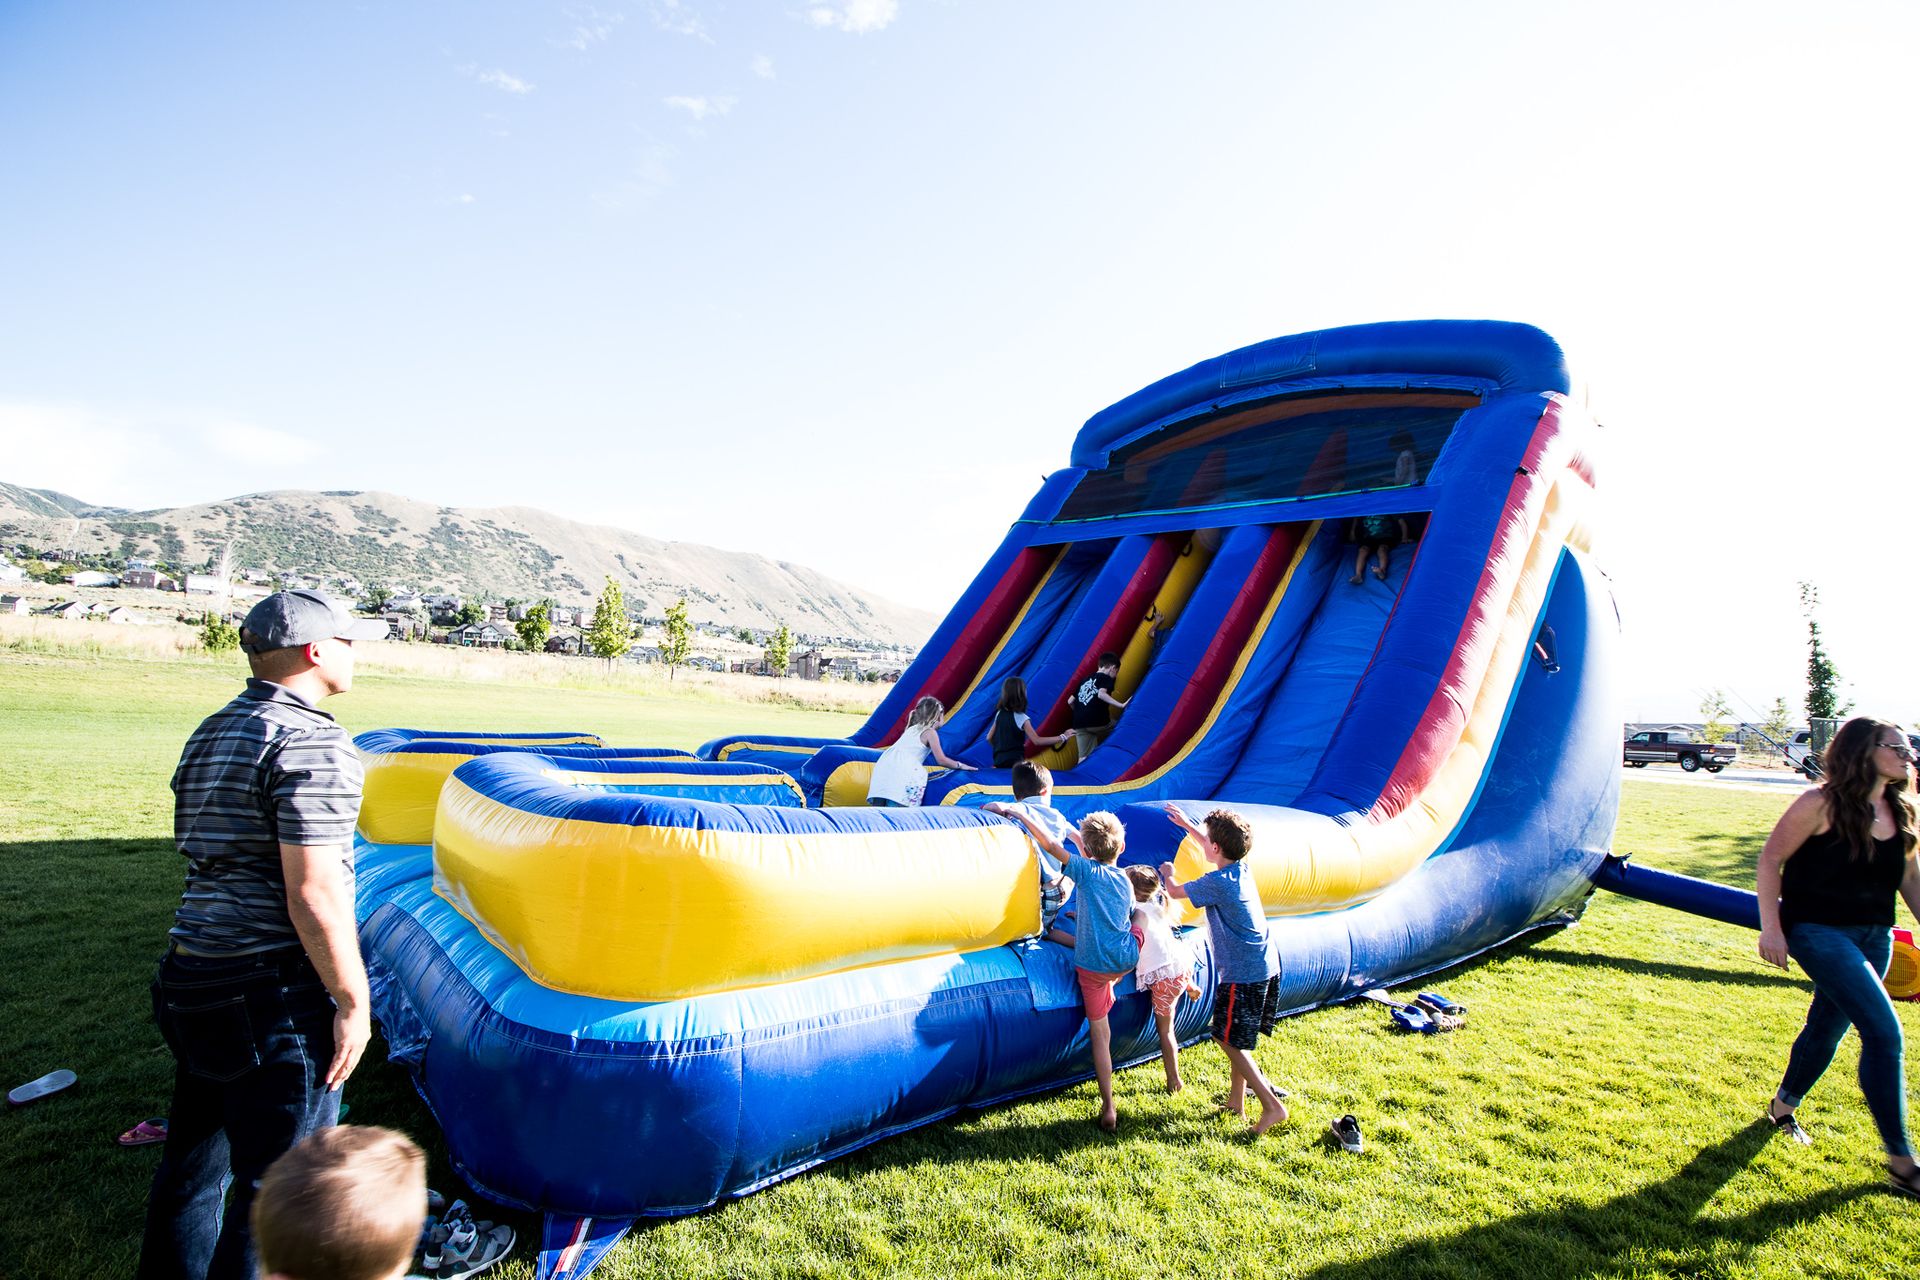 Kids playing in blow up bouncy house in grass field.